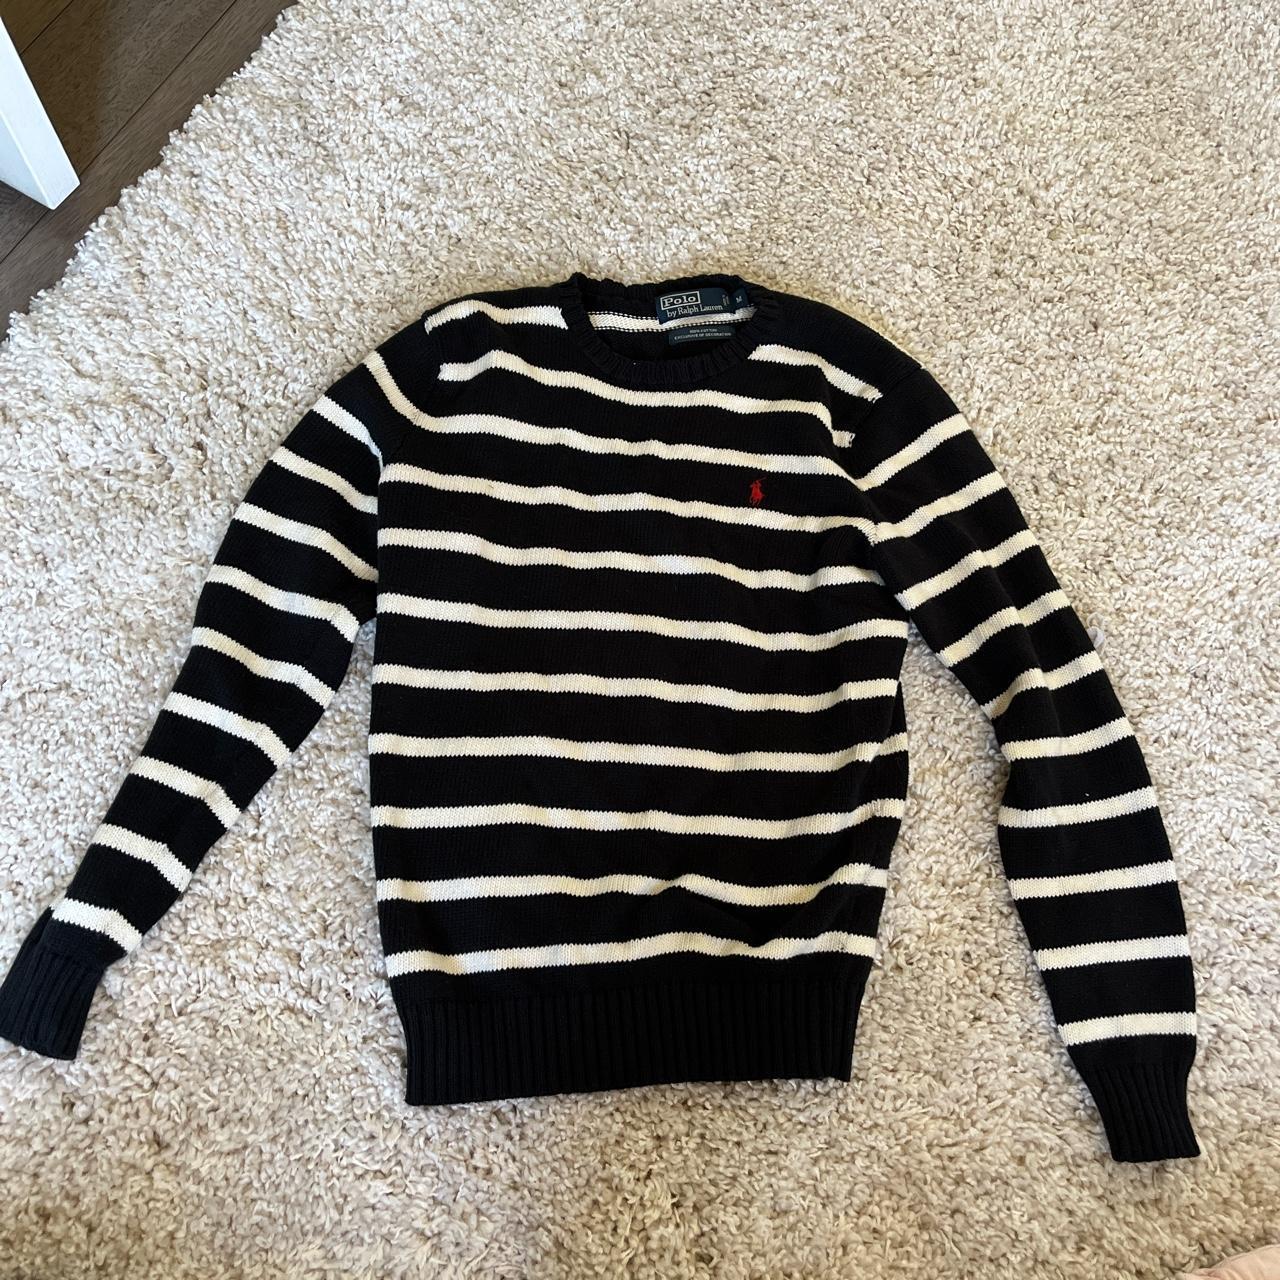 🐎 vintage Polo Ralph lauren black and white striped